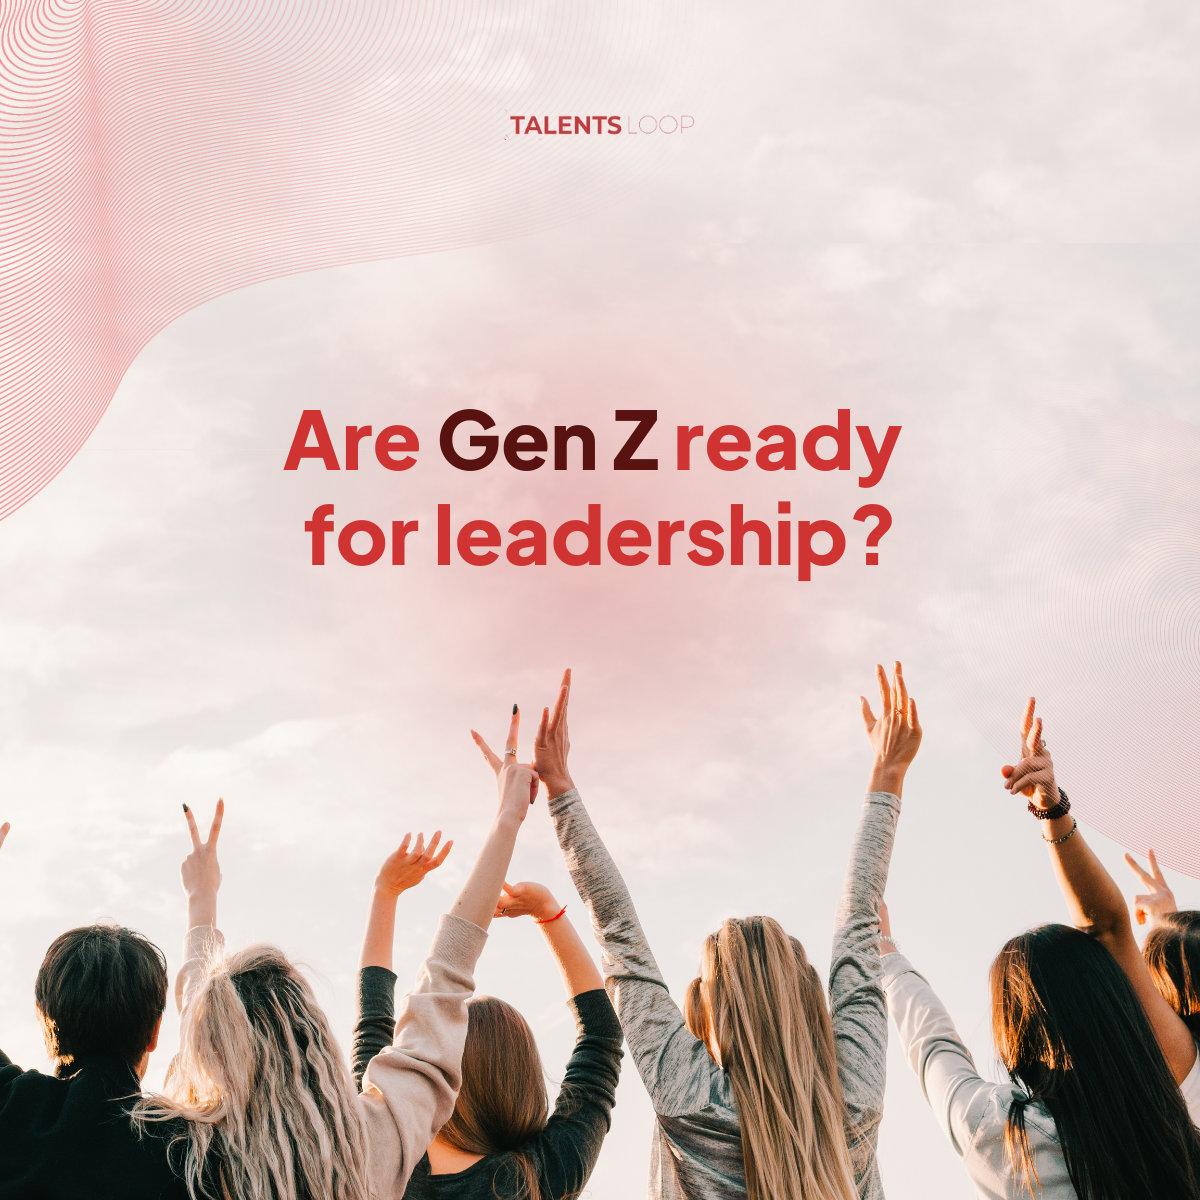 Are Gen Z ready for leadership?